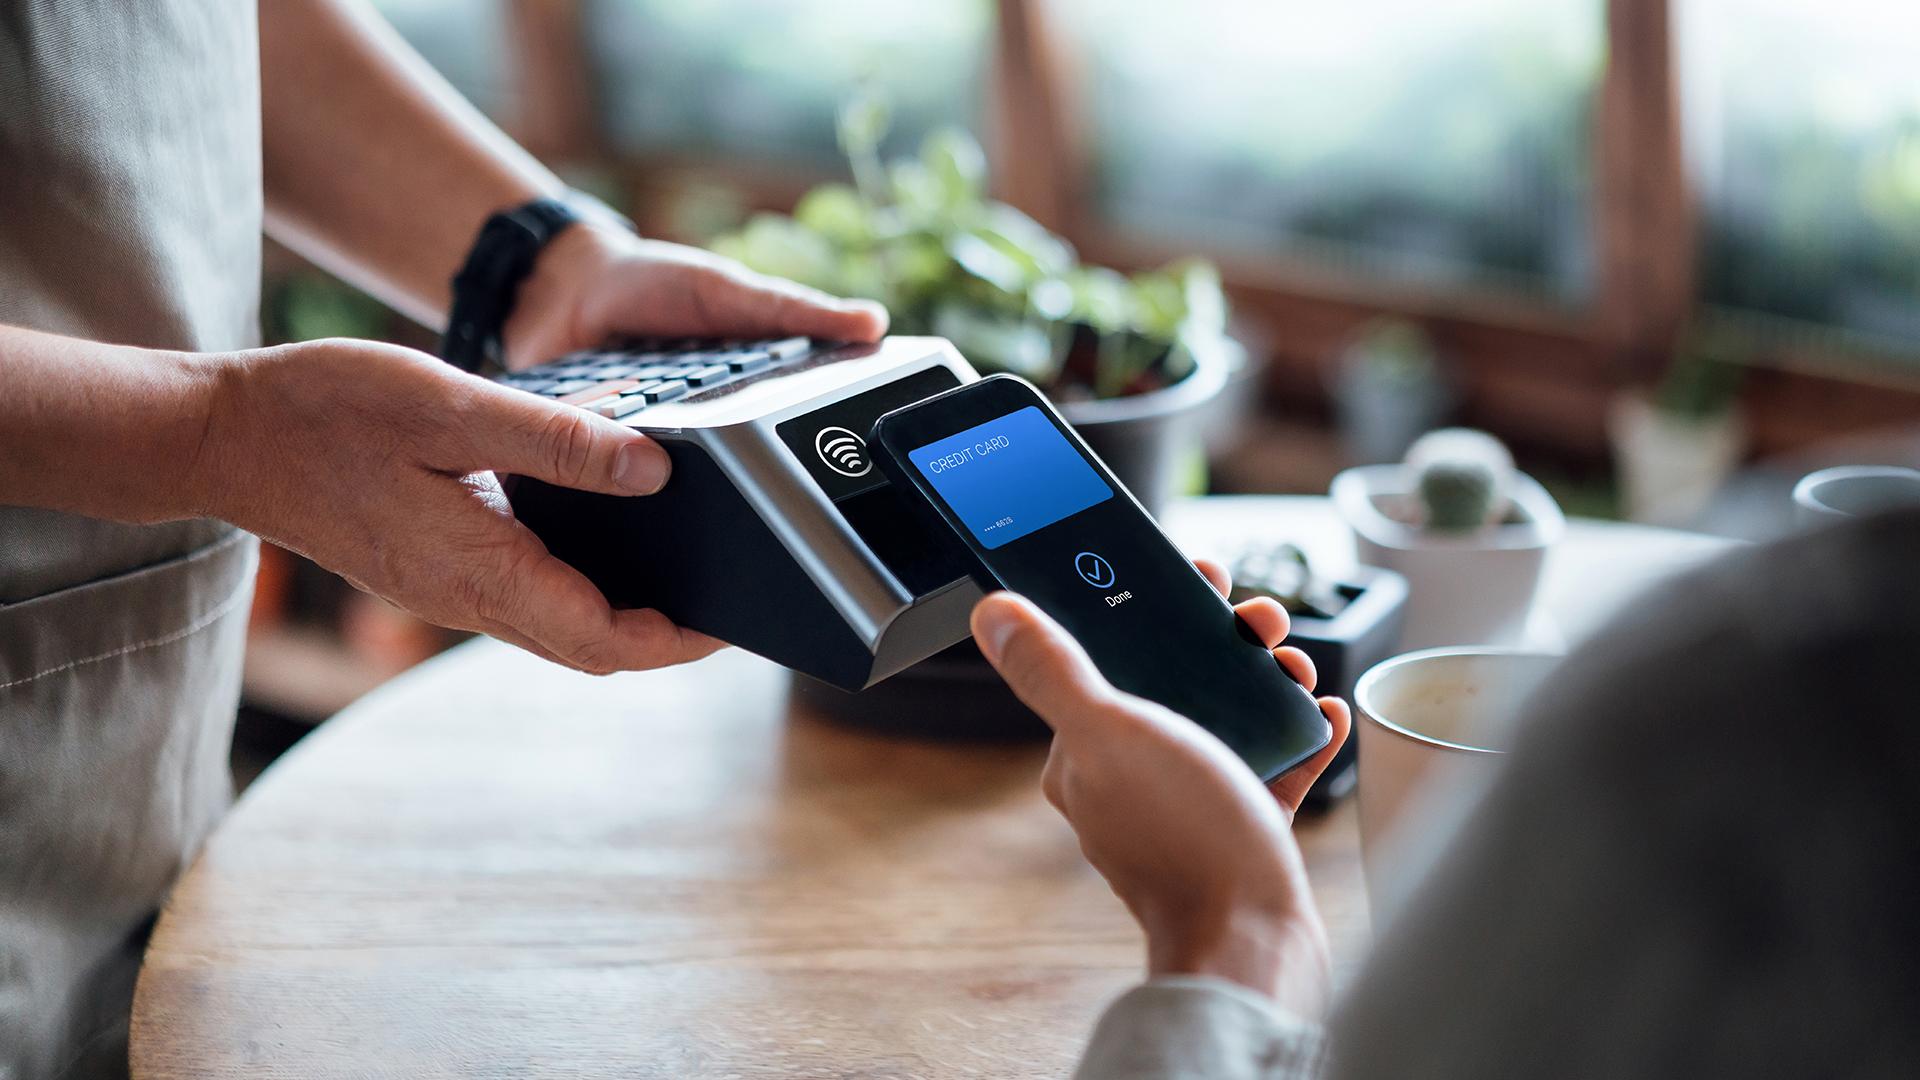 Close up of a male's hand paying bill with credit card contactless payment on smartphone in a cafe, scanning on a card machine